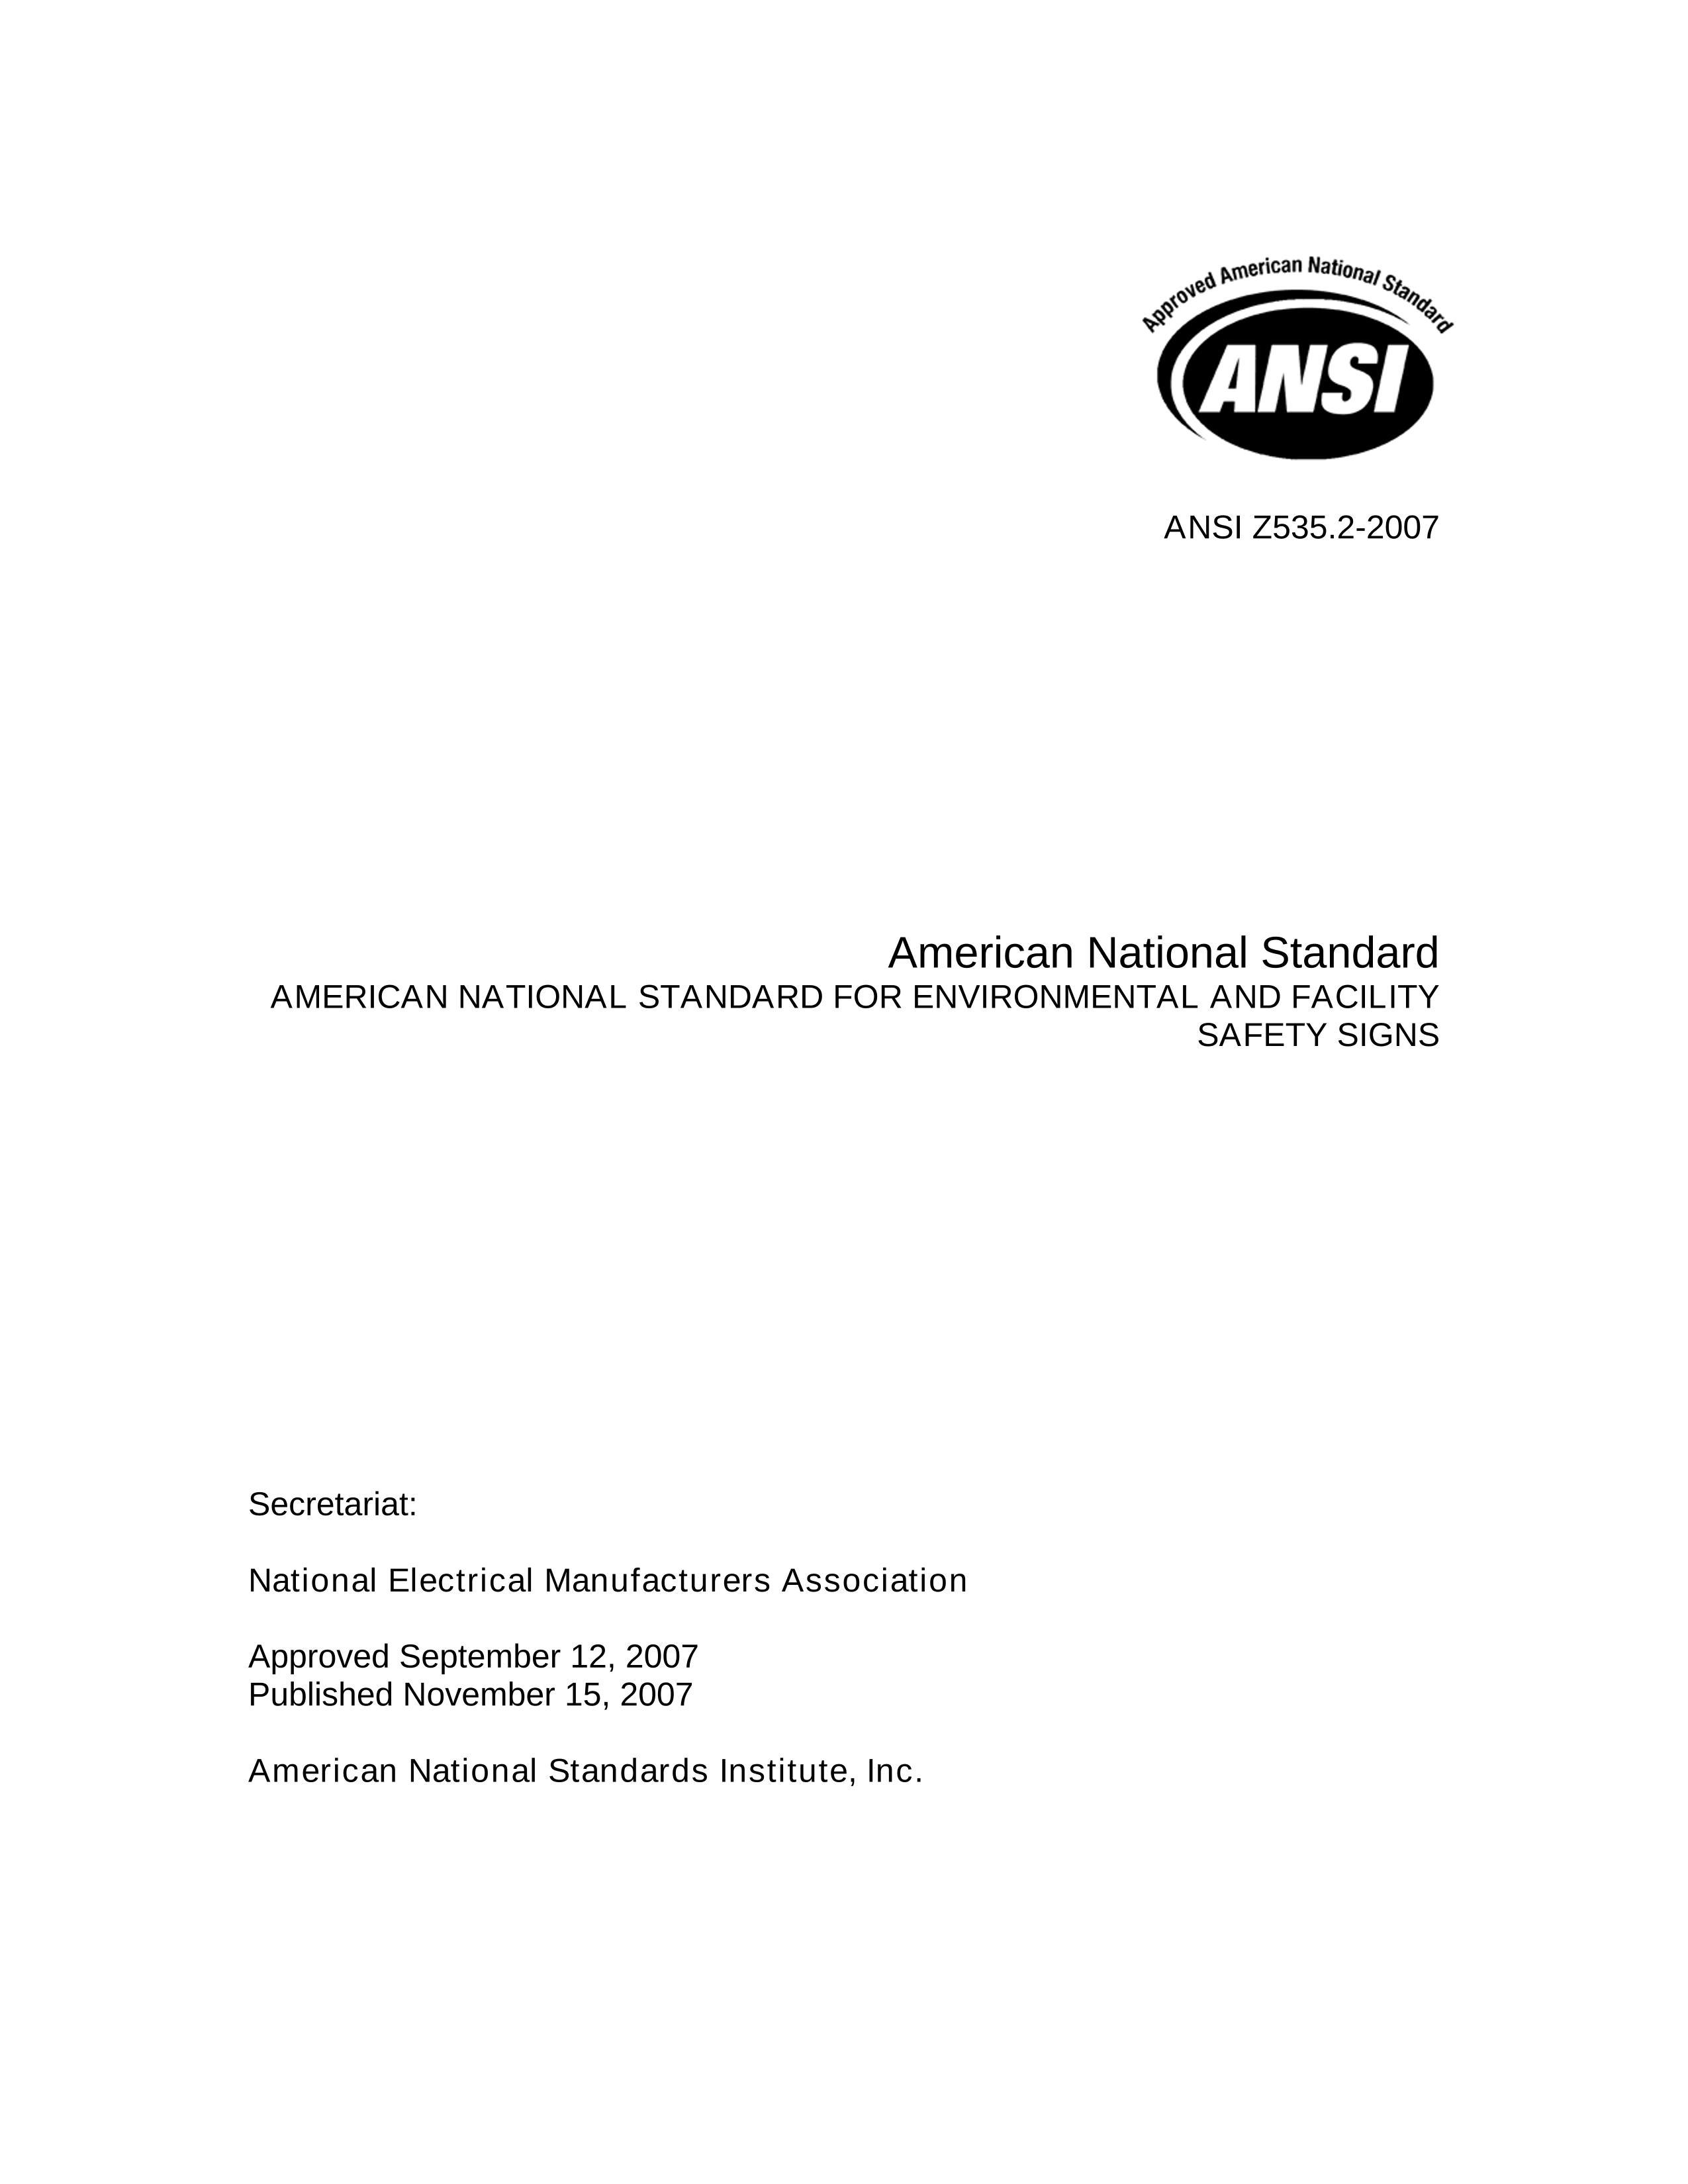 ANSI Z535.2-2007 American National Standard for Environmental and Facility Safety Signs.pdf3ҳ